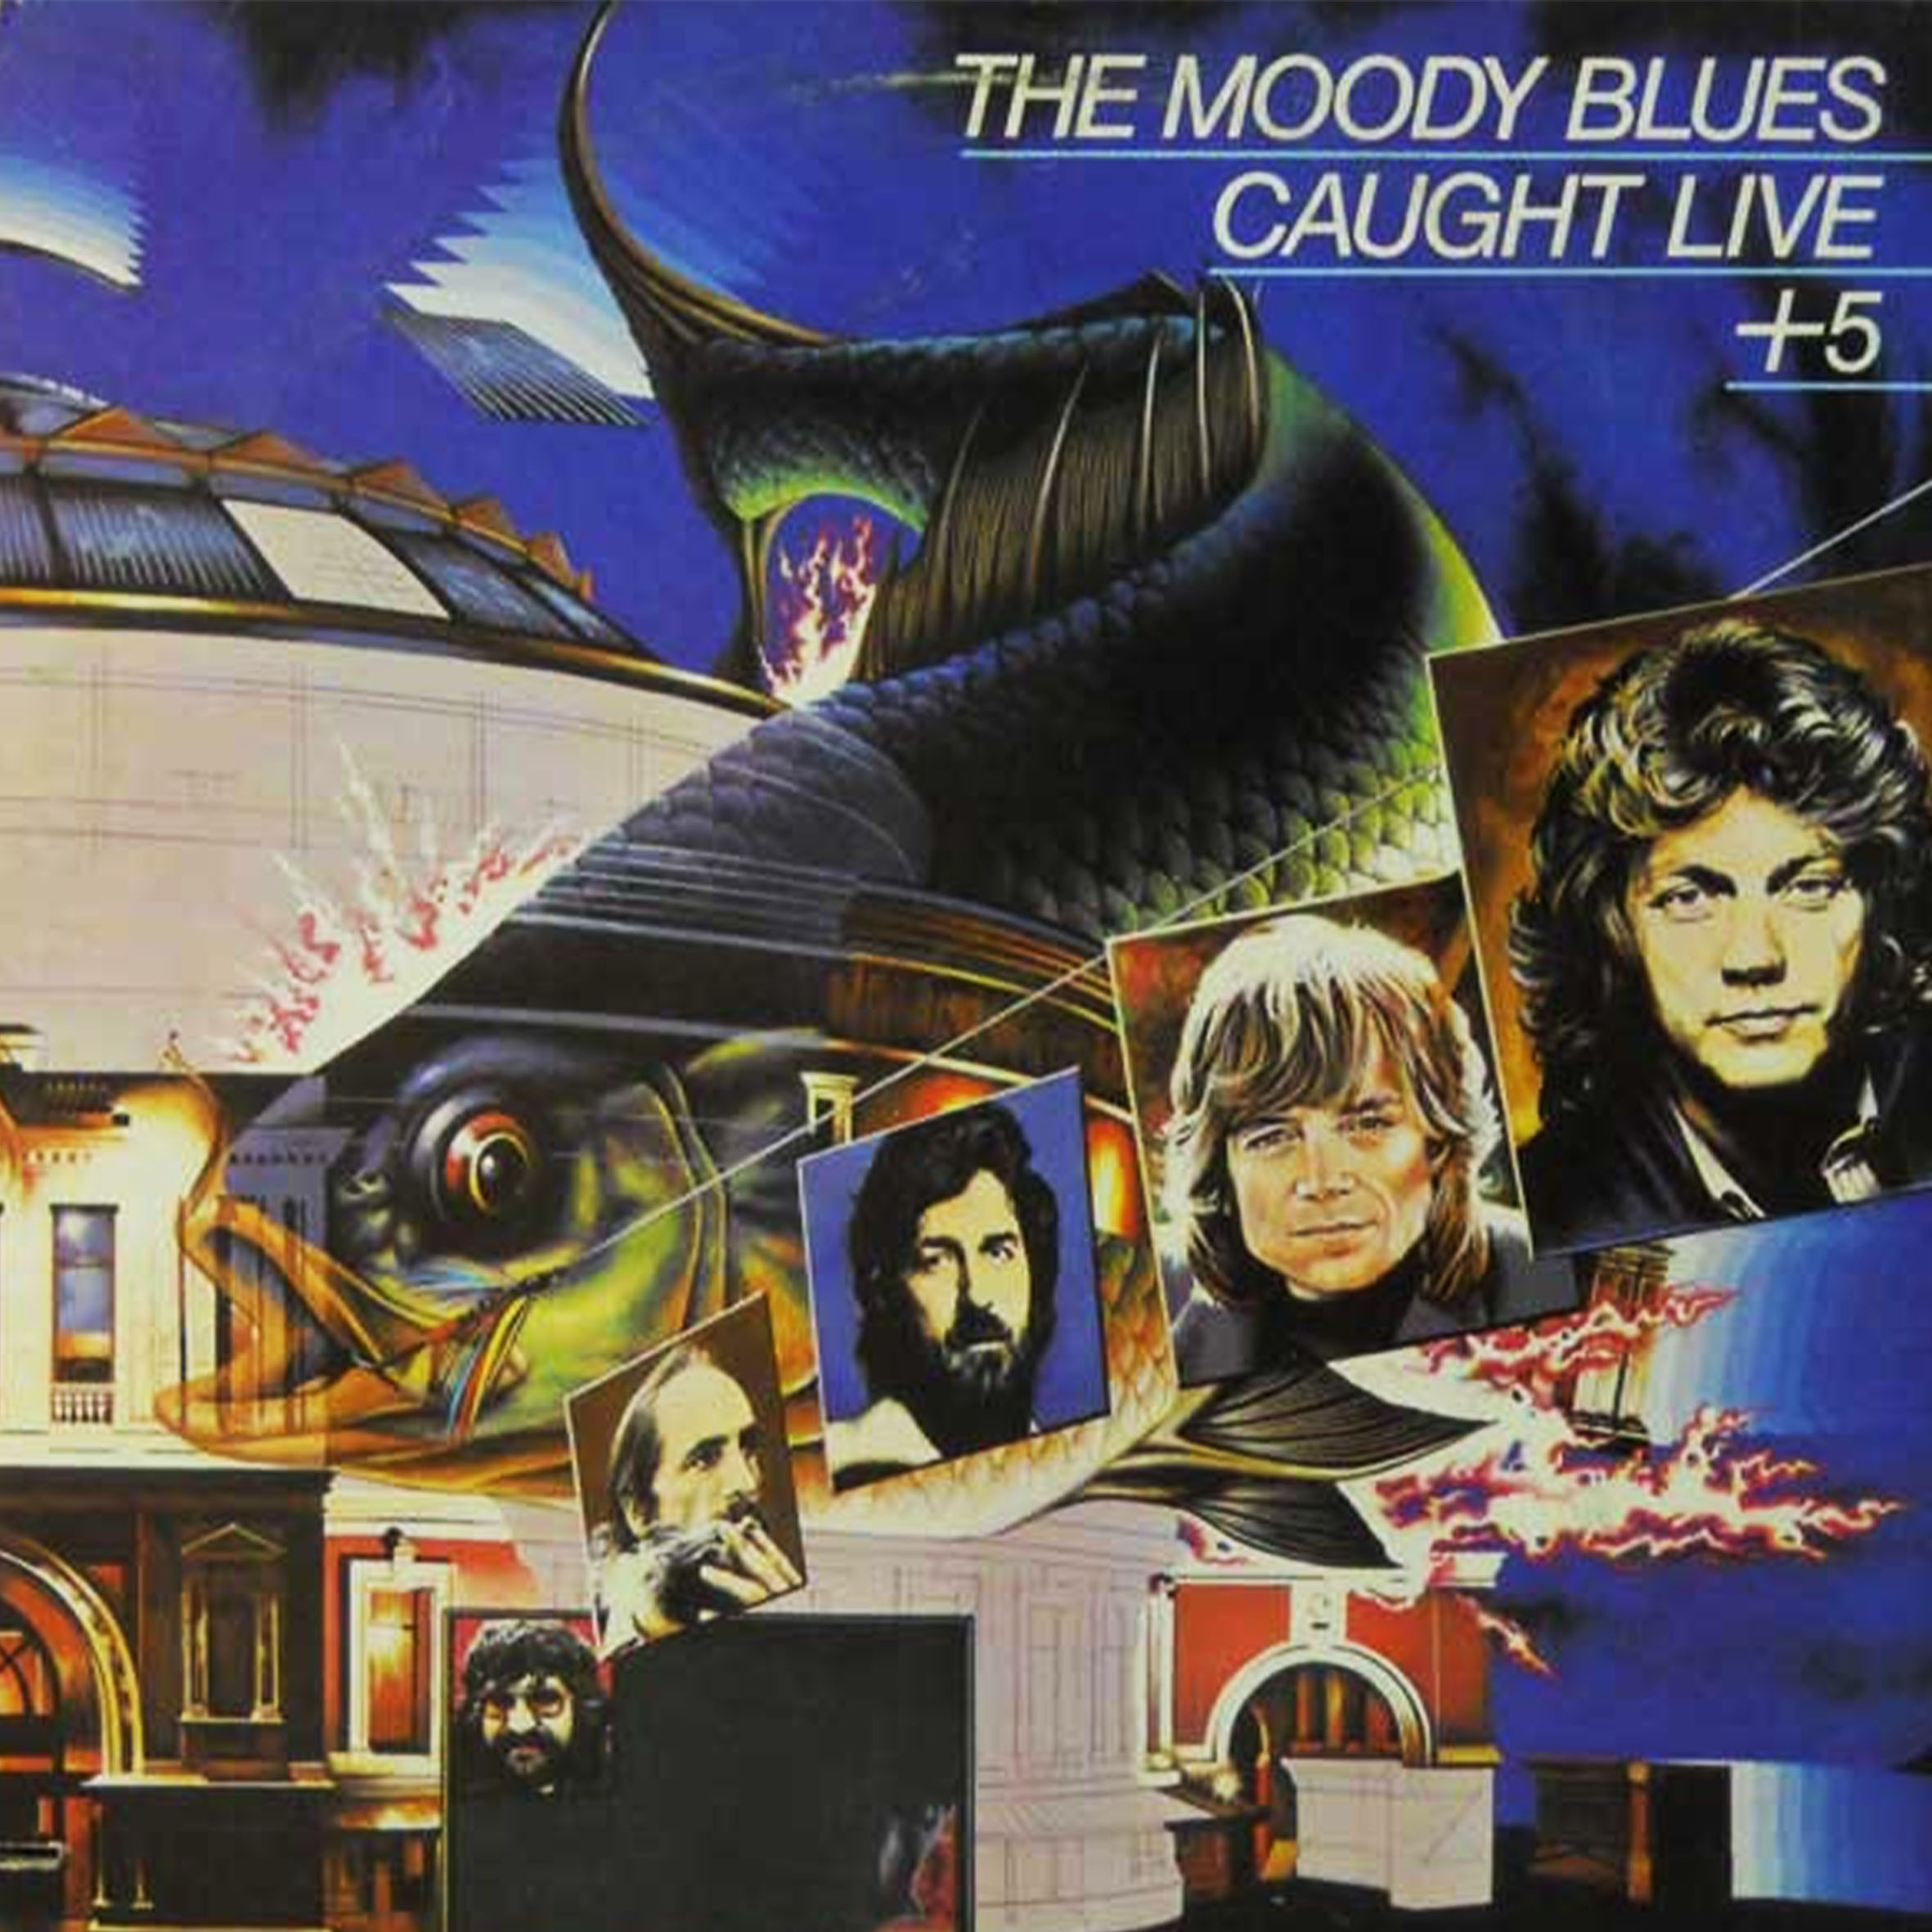 Vinil - Moody Blues The  - Caught Live +5 (duplo)